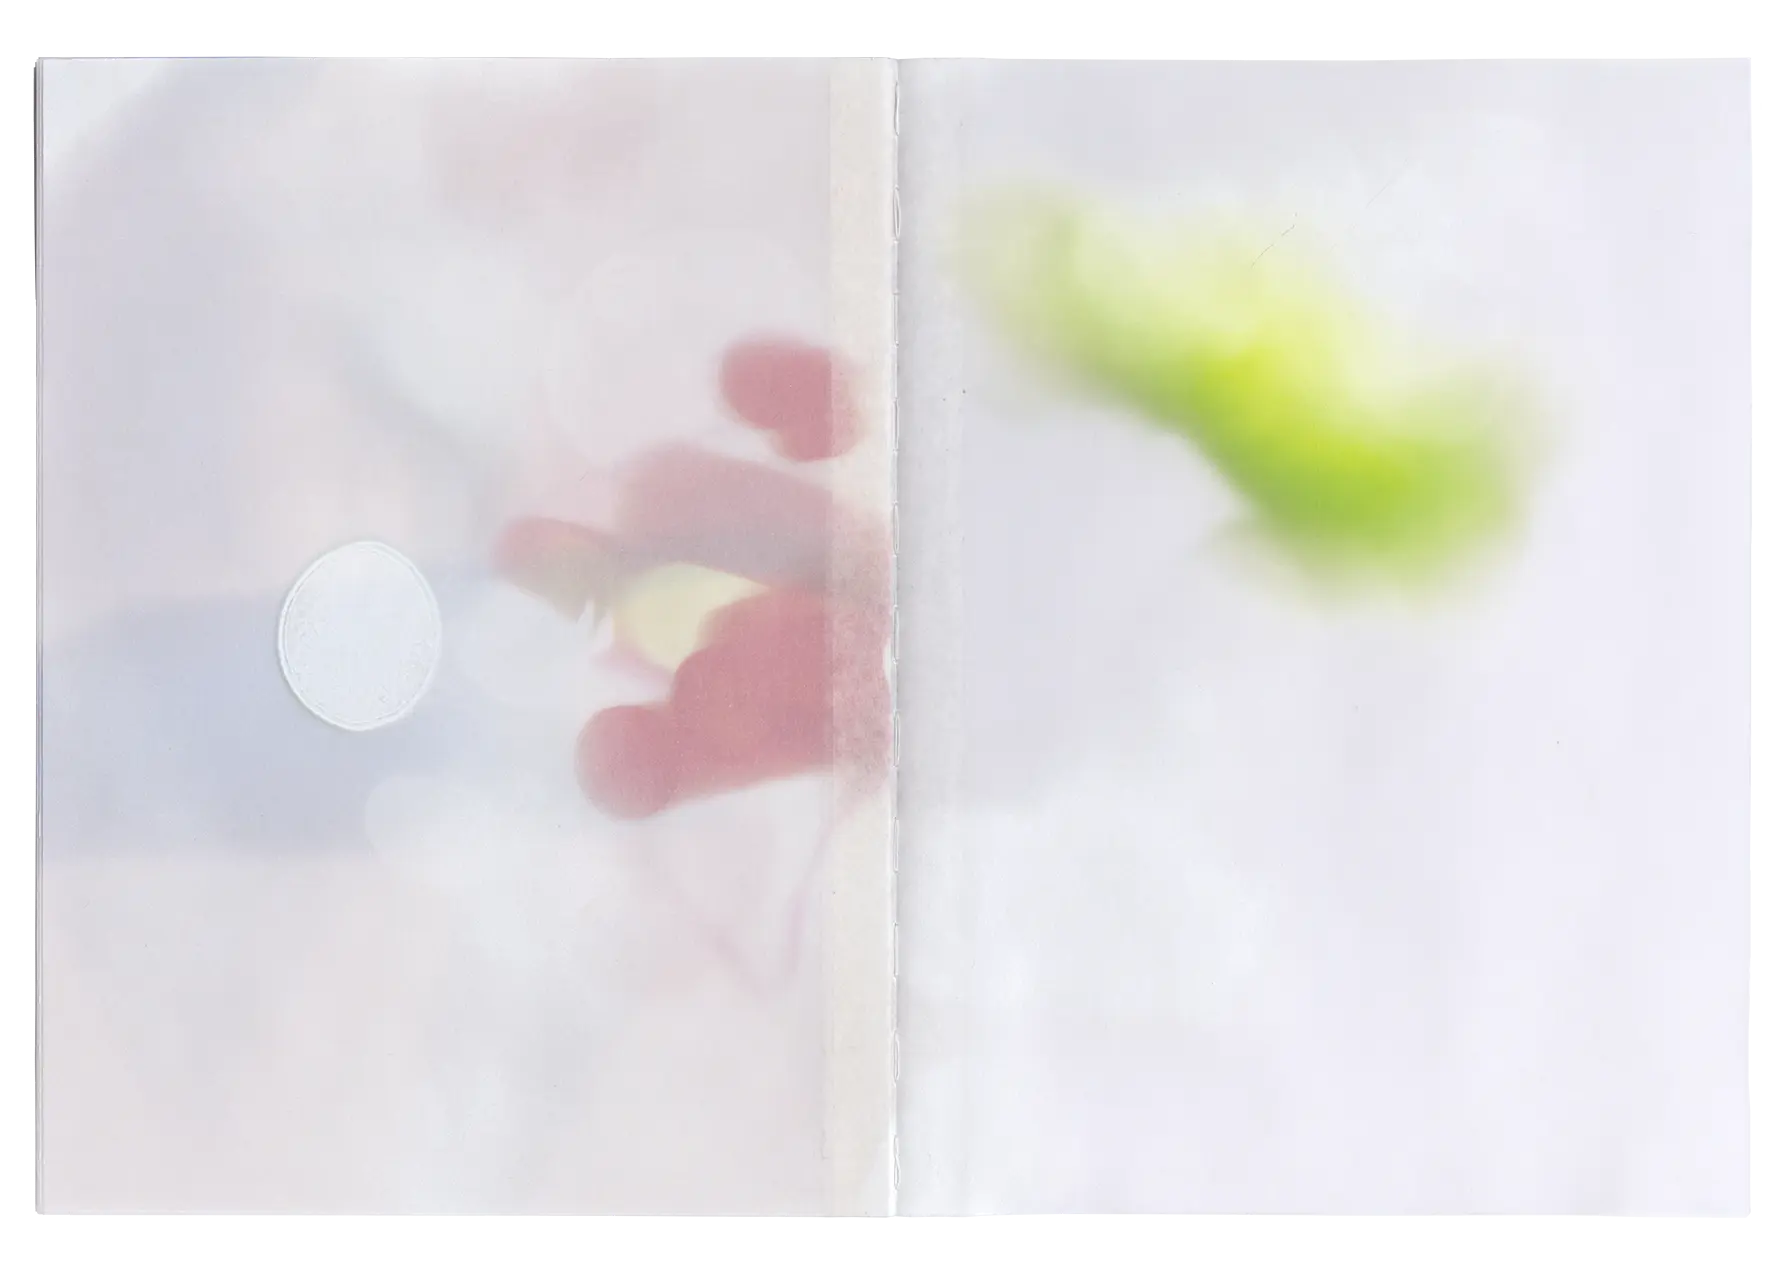 Seventeenth spread of the Bloom book, in this spread is the blur and extracted bloom of a plant sprouting from the sidewalk somewhere in the College Hills of Providence Rhode Island. Notably, the images were printed using a UV printer directly onto the pre-bound pages. As a result, the binding thread in the book's seam has taken on some of the color from the images.